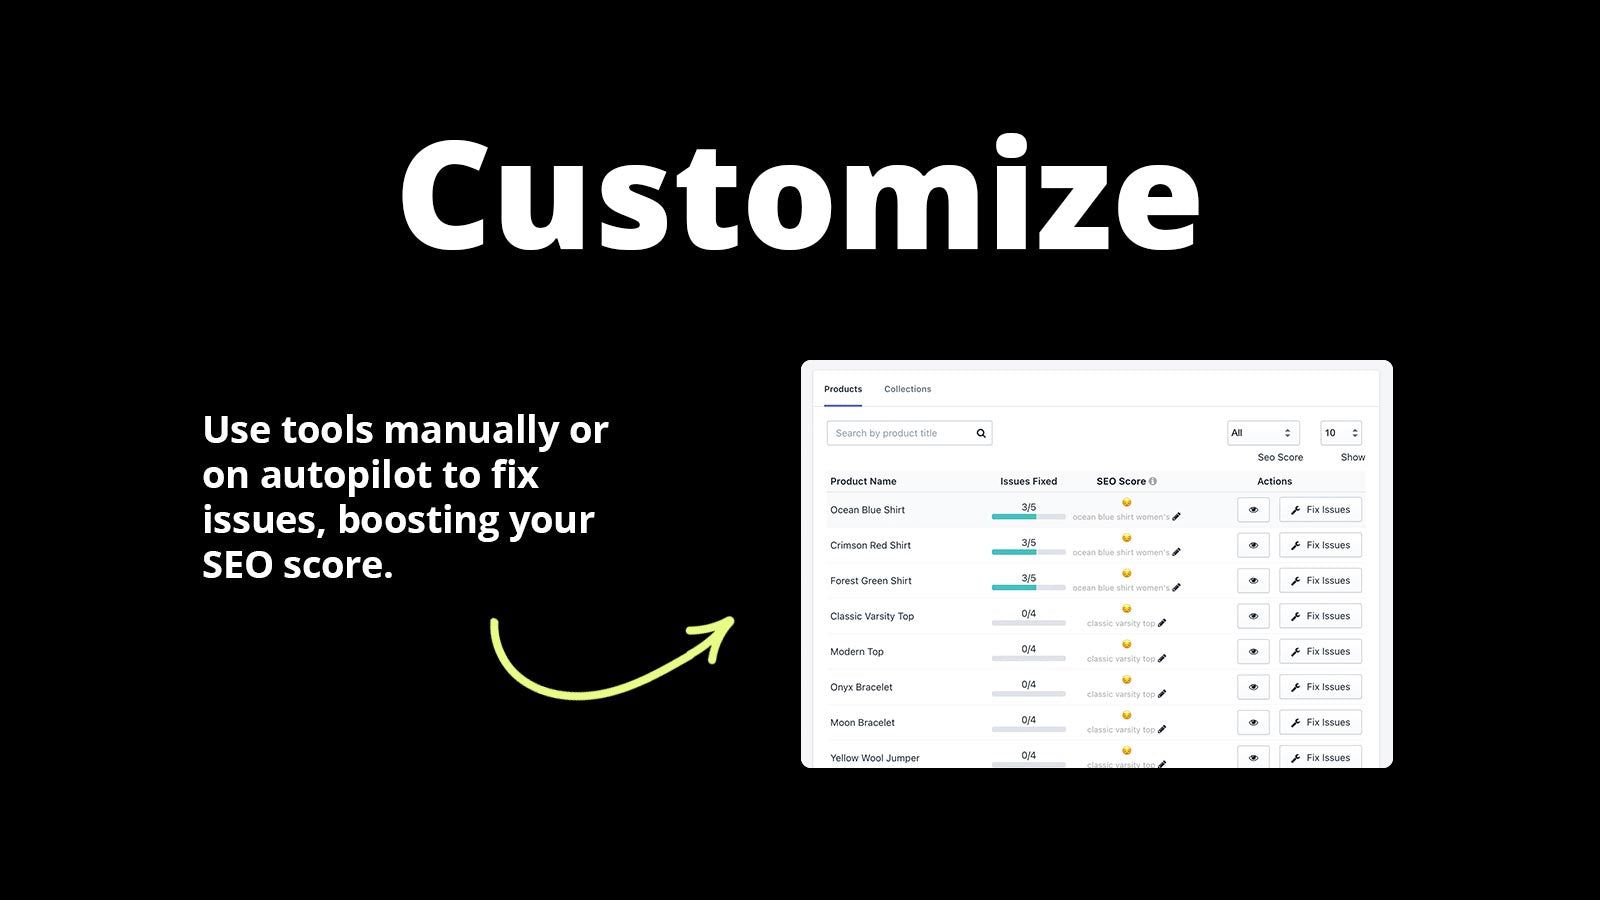 Customize - Use tools to fix issues, boosting your SEO score.